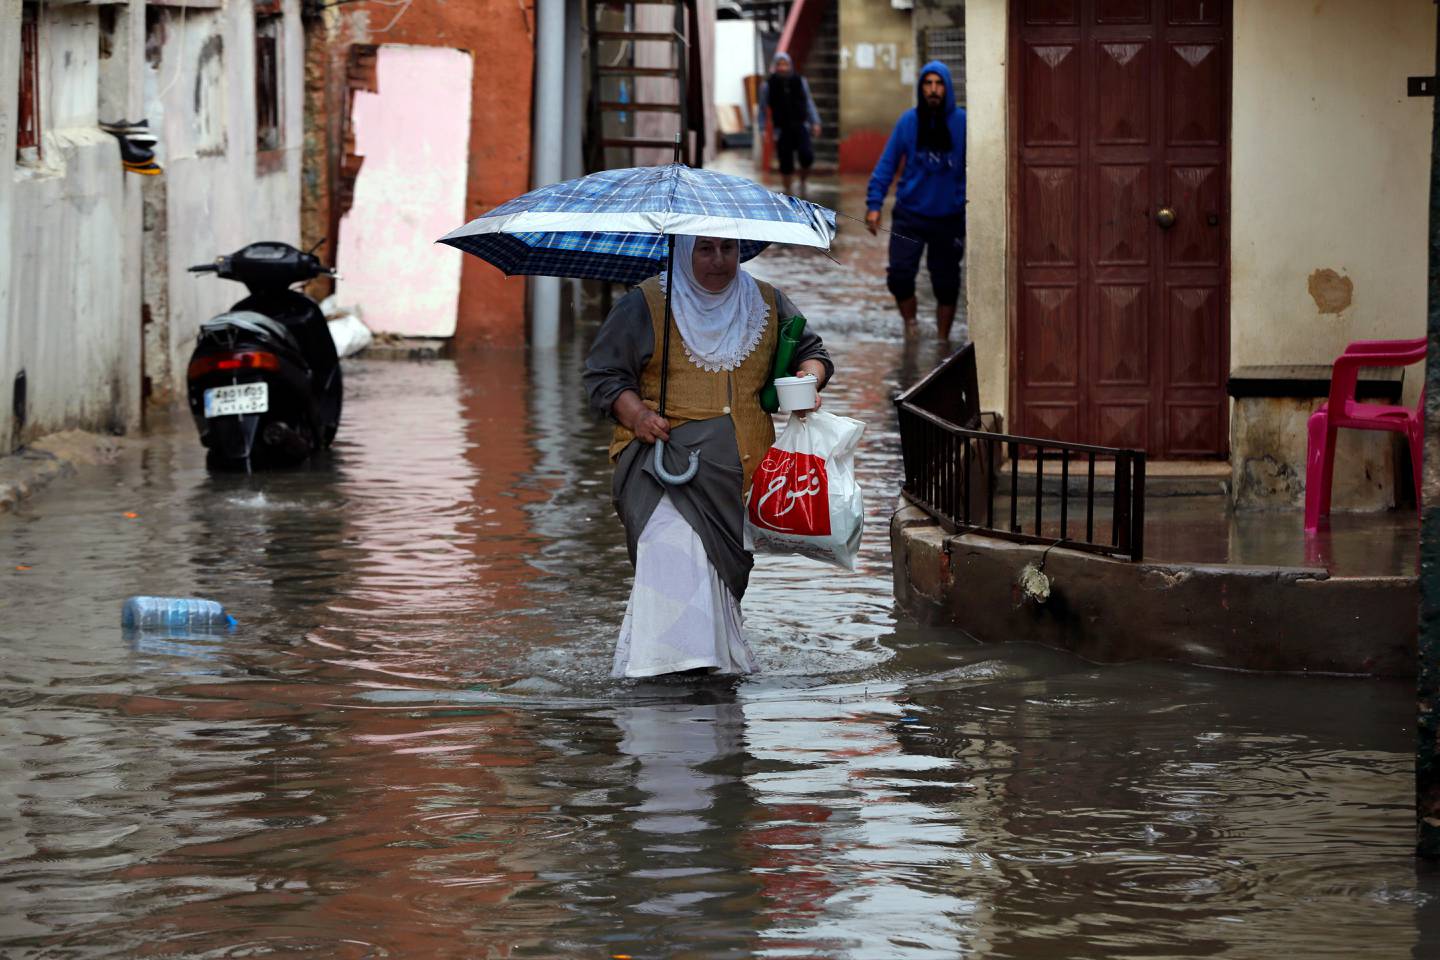 People walk through floodwaters in Beirut's southern suburb of Ouzai, Lebanon, Monday, Dec. 9, 2019. A rainstorm paralyzed parts of Lebanon's capital Beirut on Monday, turning streets to small rivers, stranding motorists inside their vehicles and damaging homes in some areas. (AP Photo/Bilal Hussein)